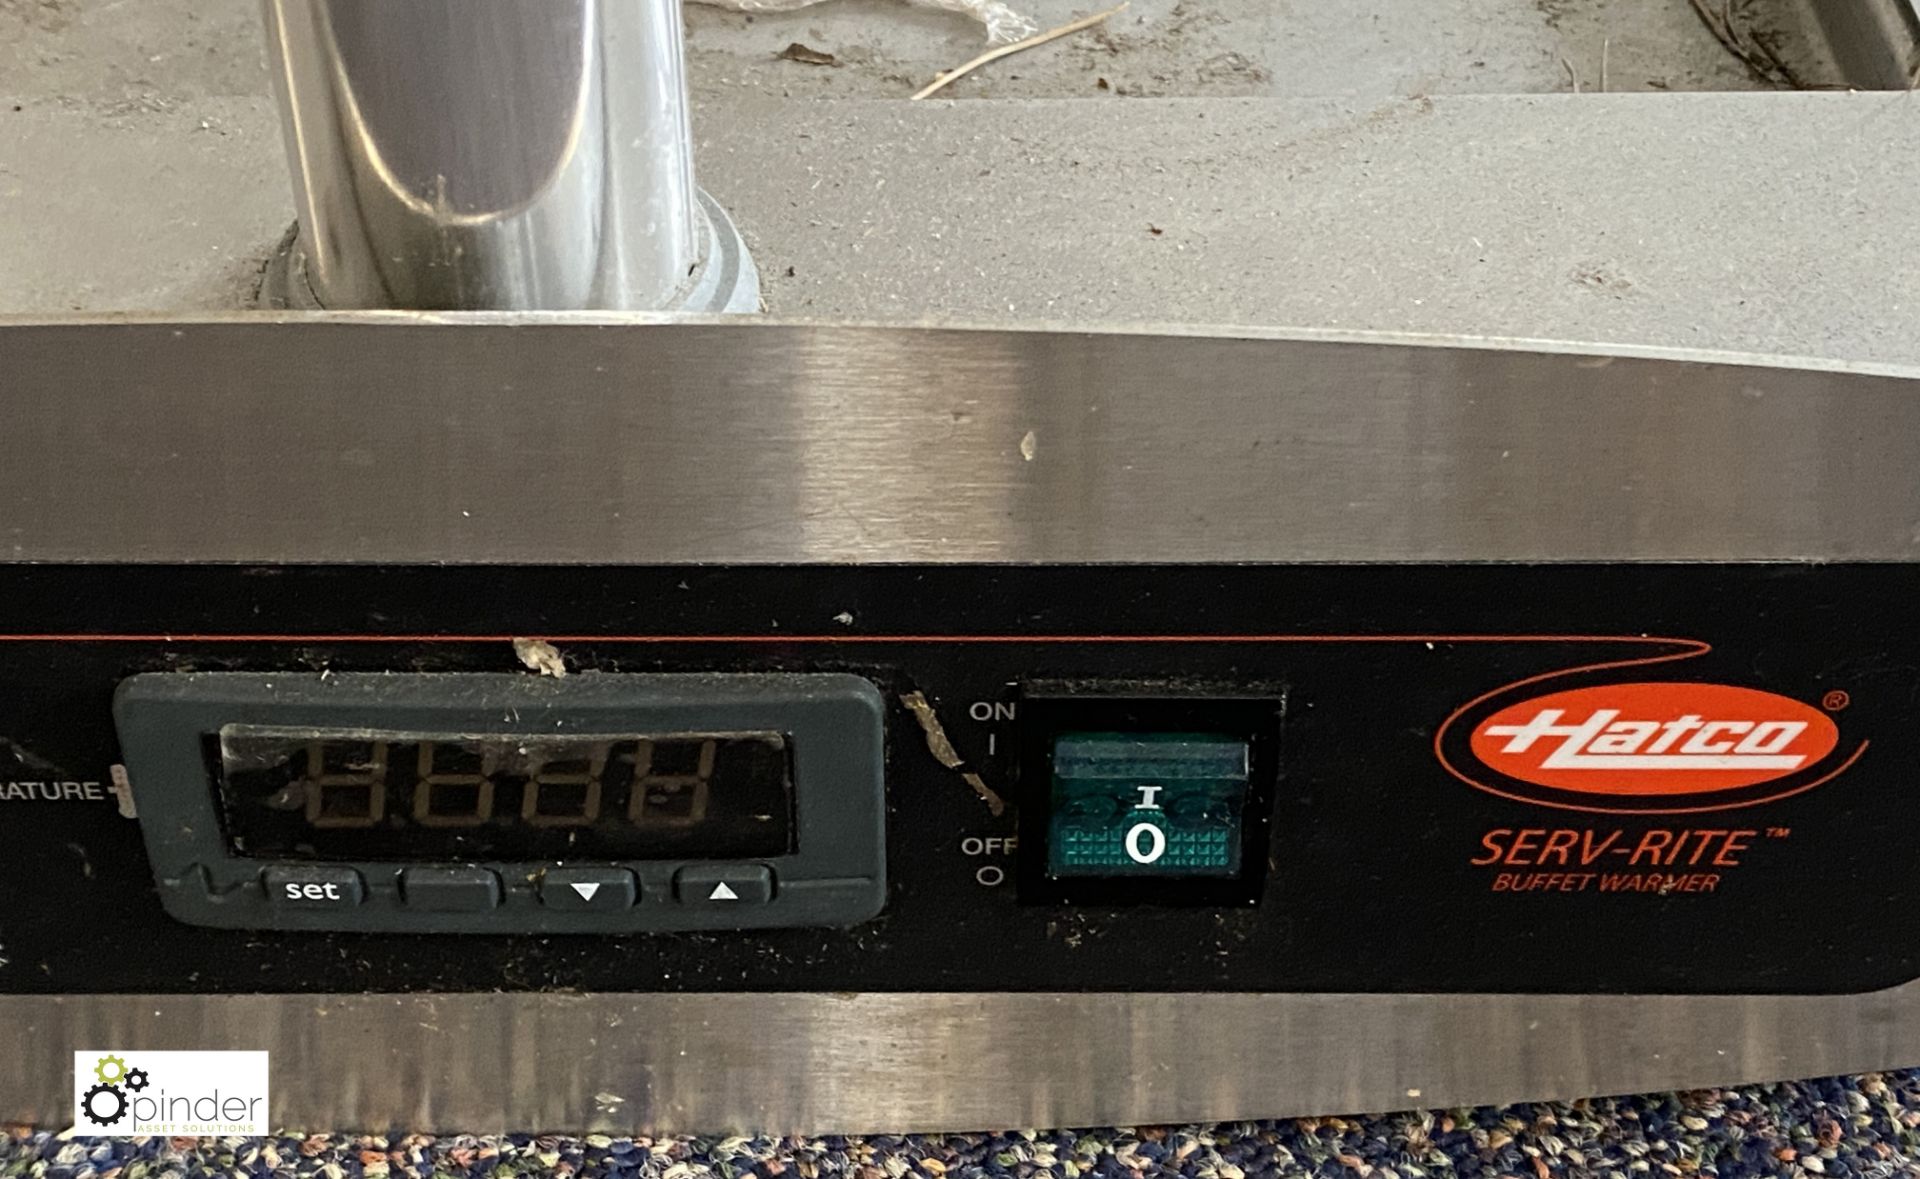 Hatco Serv-Rite counter top Heated Servery Unit, 240volts, 800mm x 580mm - Image 3 of 3